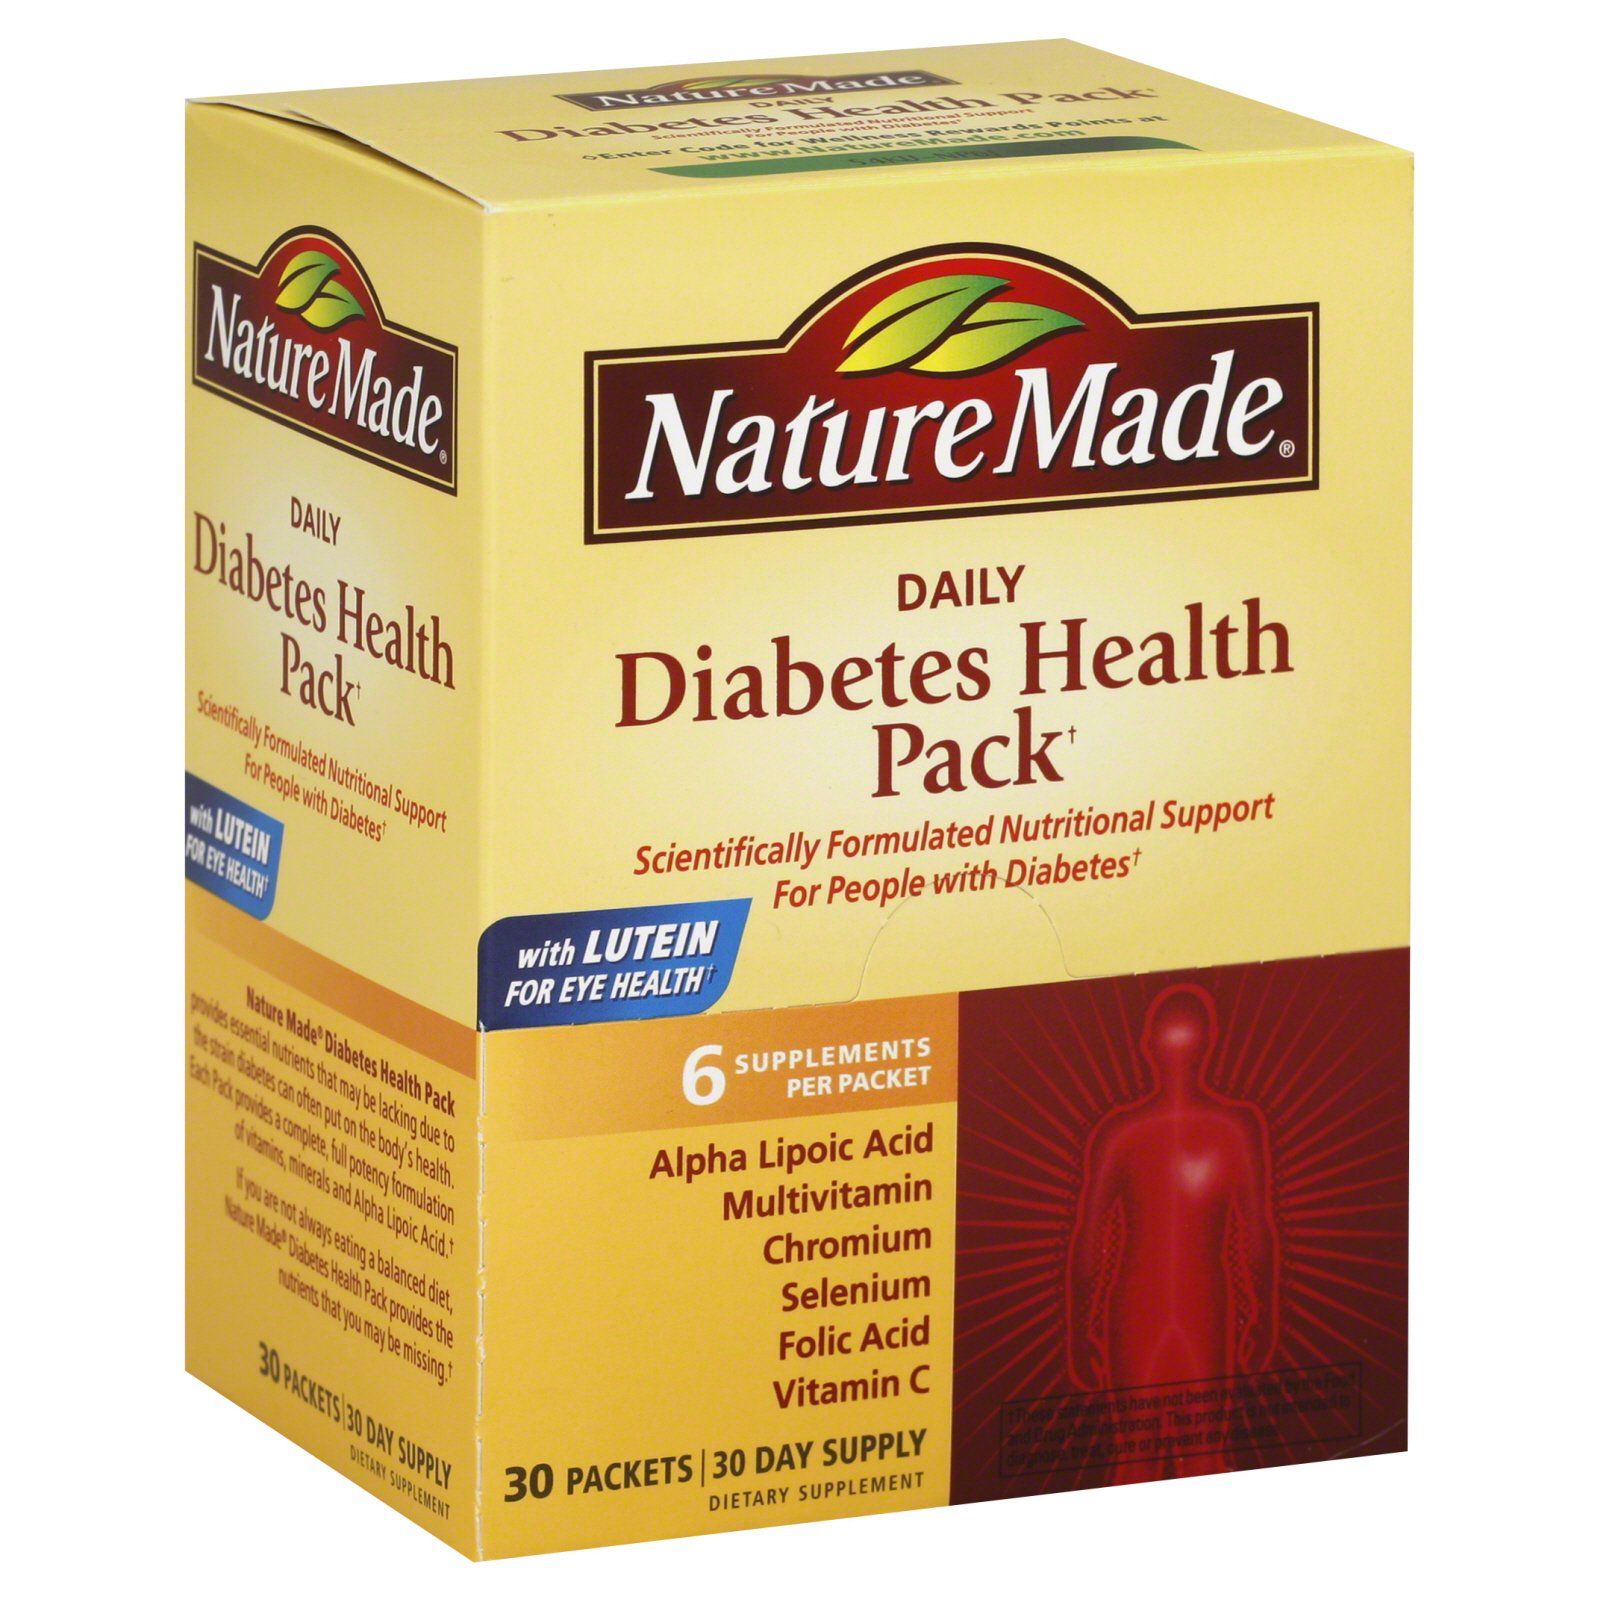 Nature Made Diabetes Health Pack, 30 packets